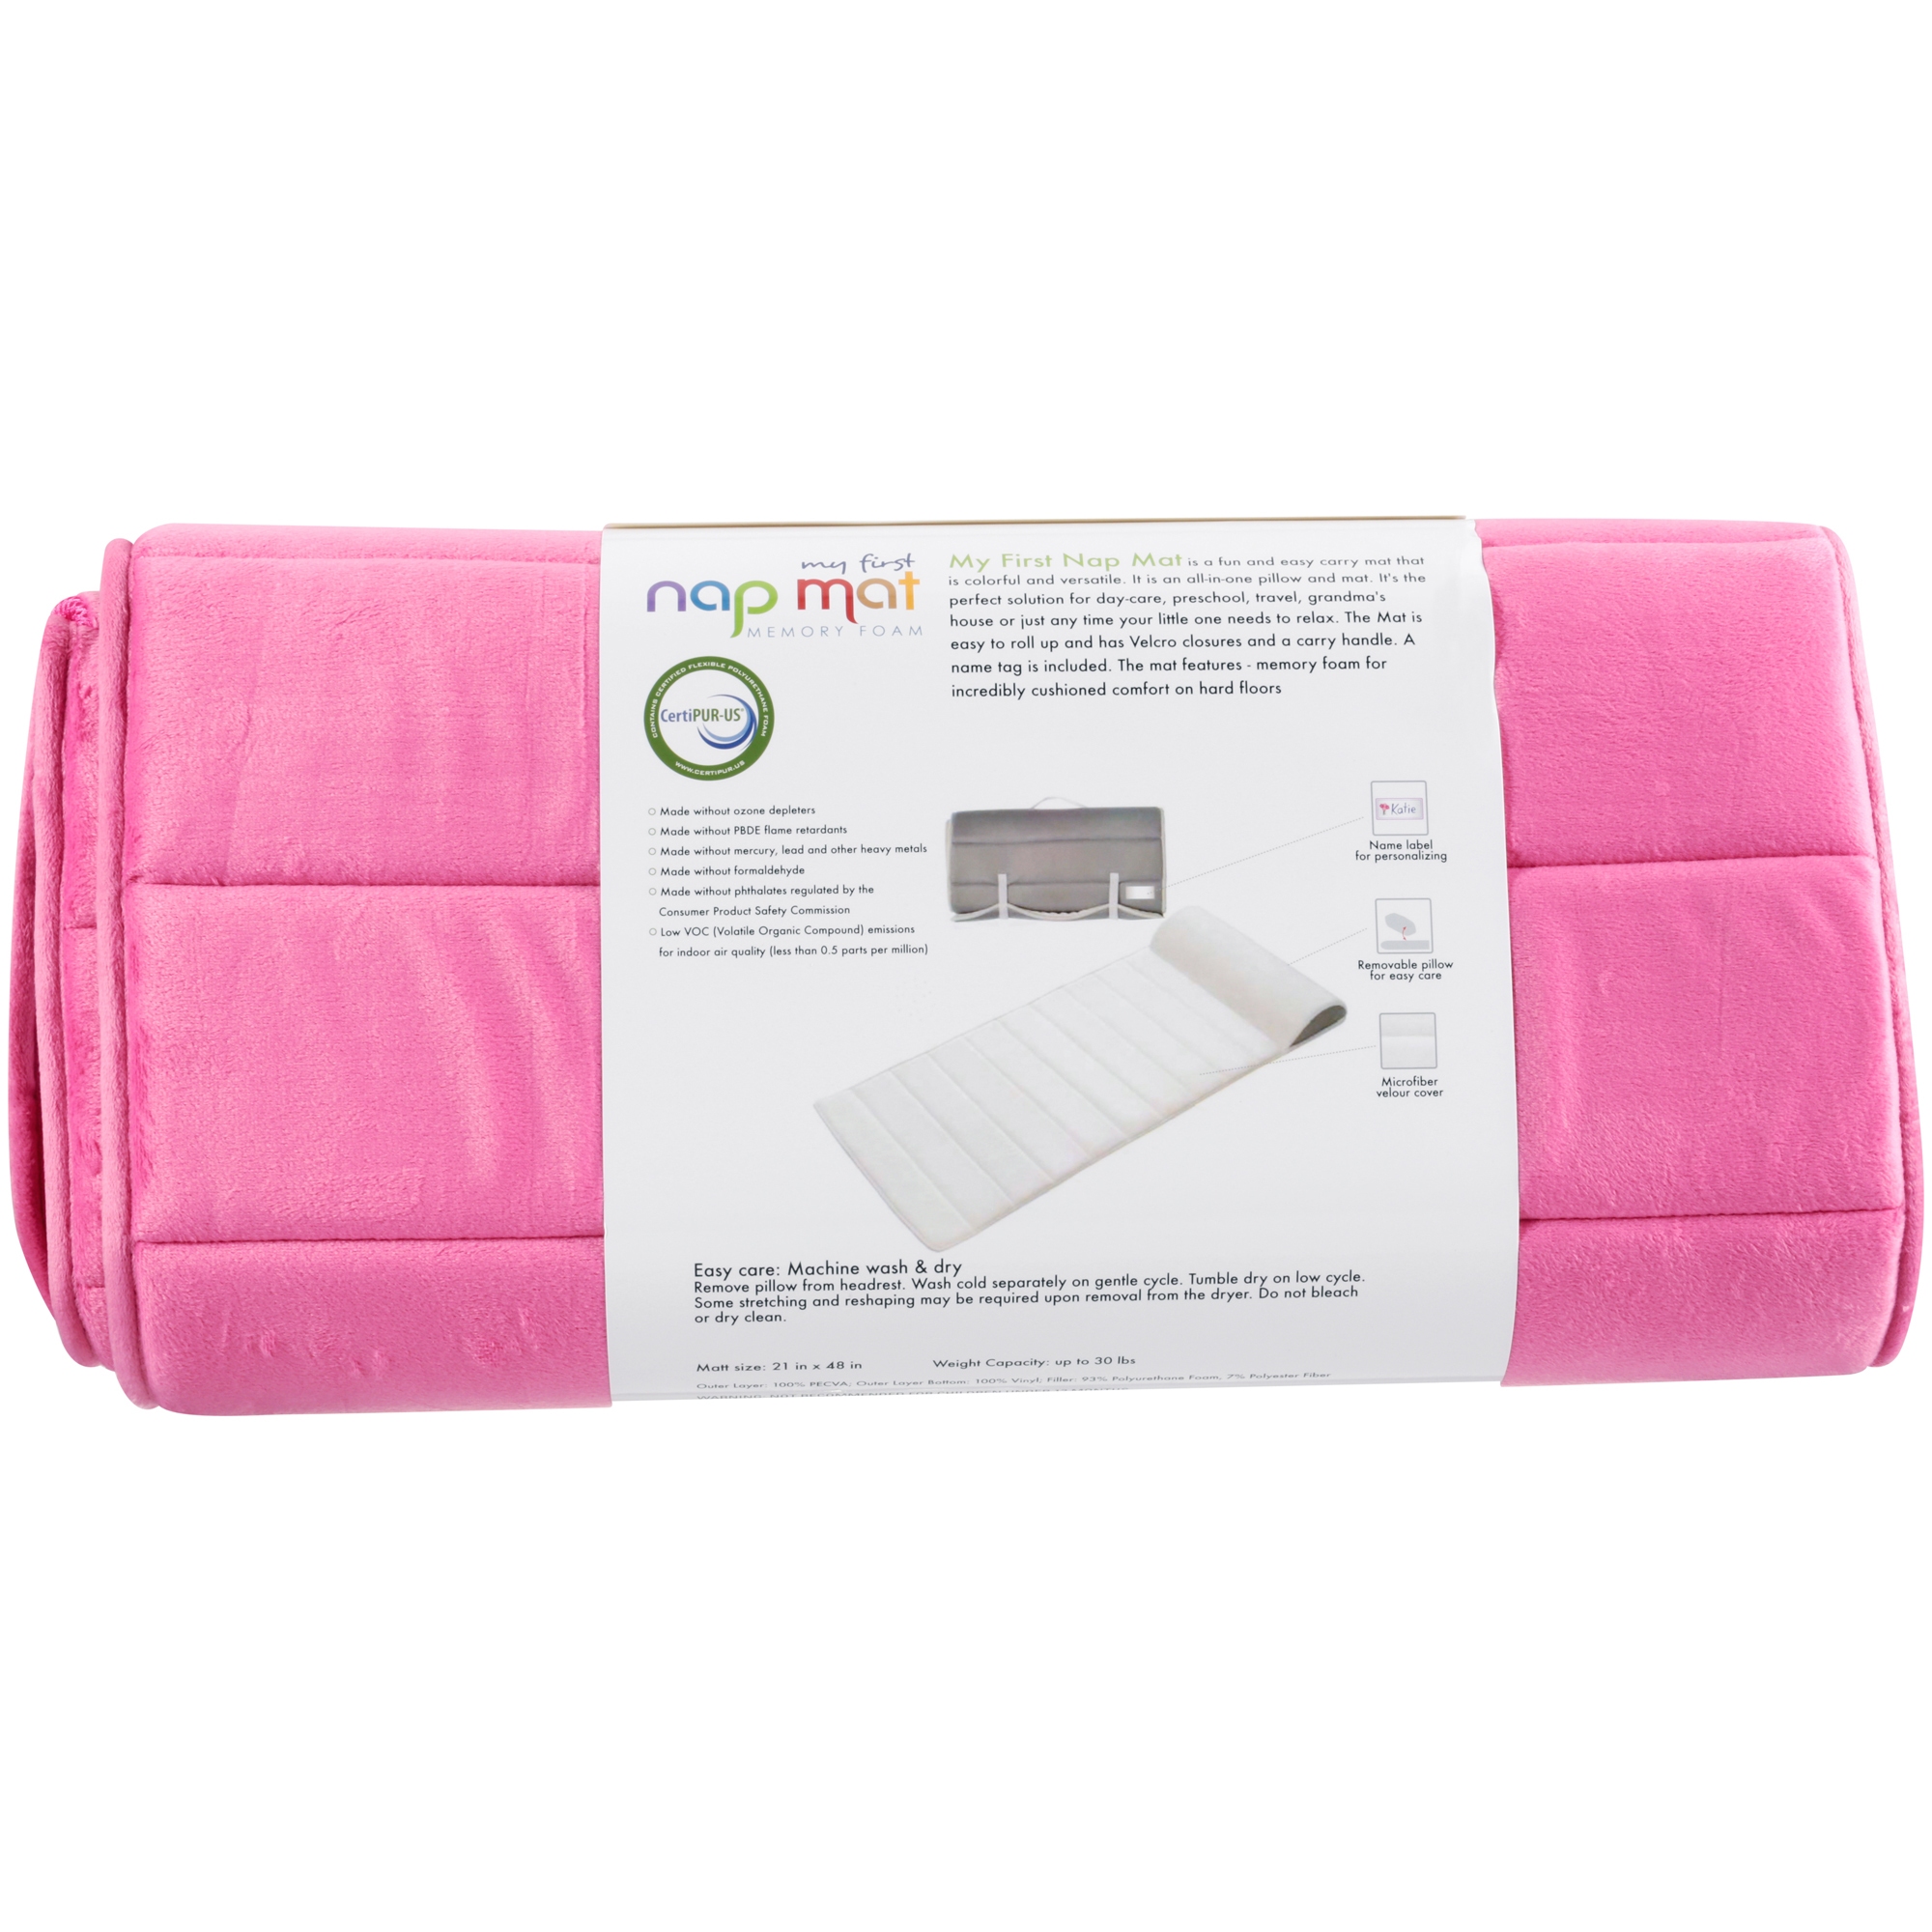 My First Pillow Female Pink Solid Memory Foam Nap Mats, Cushioned Removable Washable Cooling - image 3 of 5